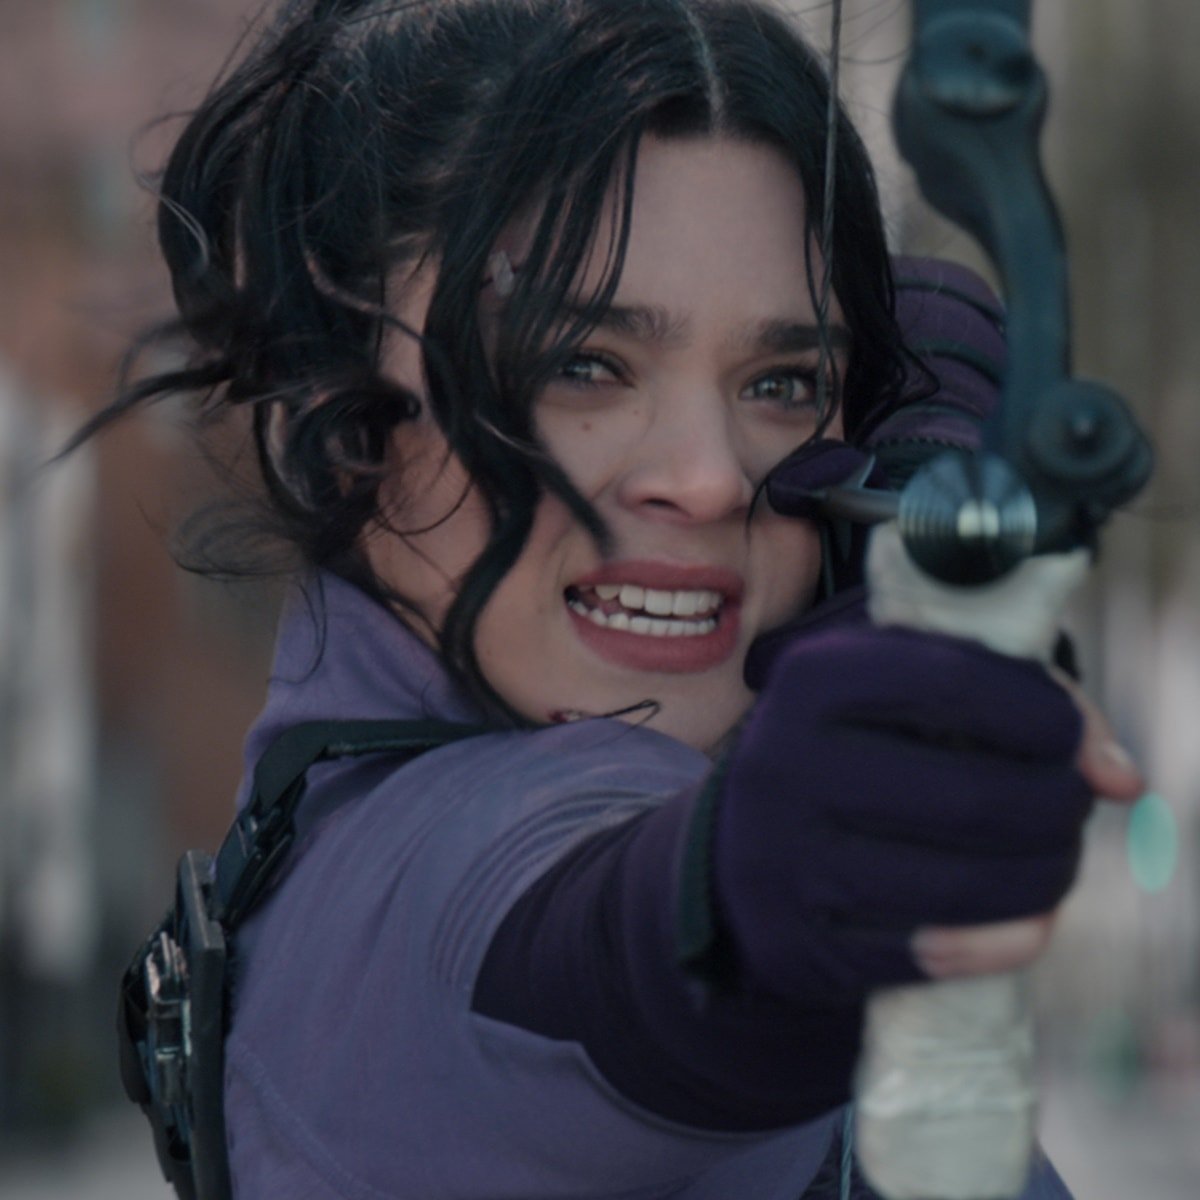 Hailee Steinfeld skillfully utilizes blue contact lenses to authentically embody the character of Kate Bishop in the Hawkeye series